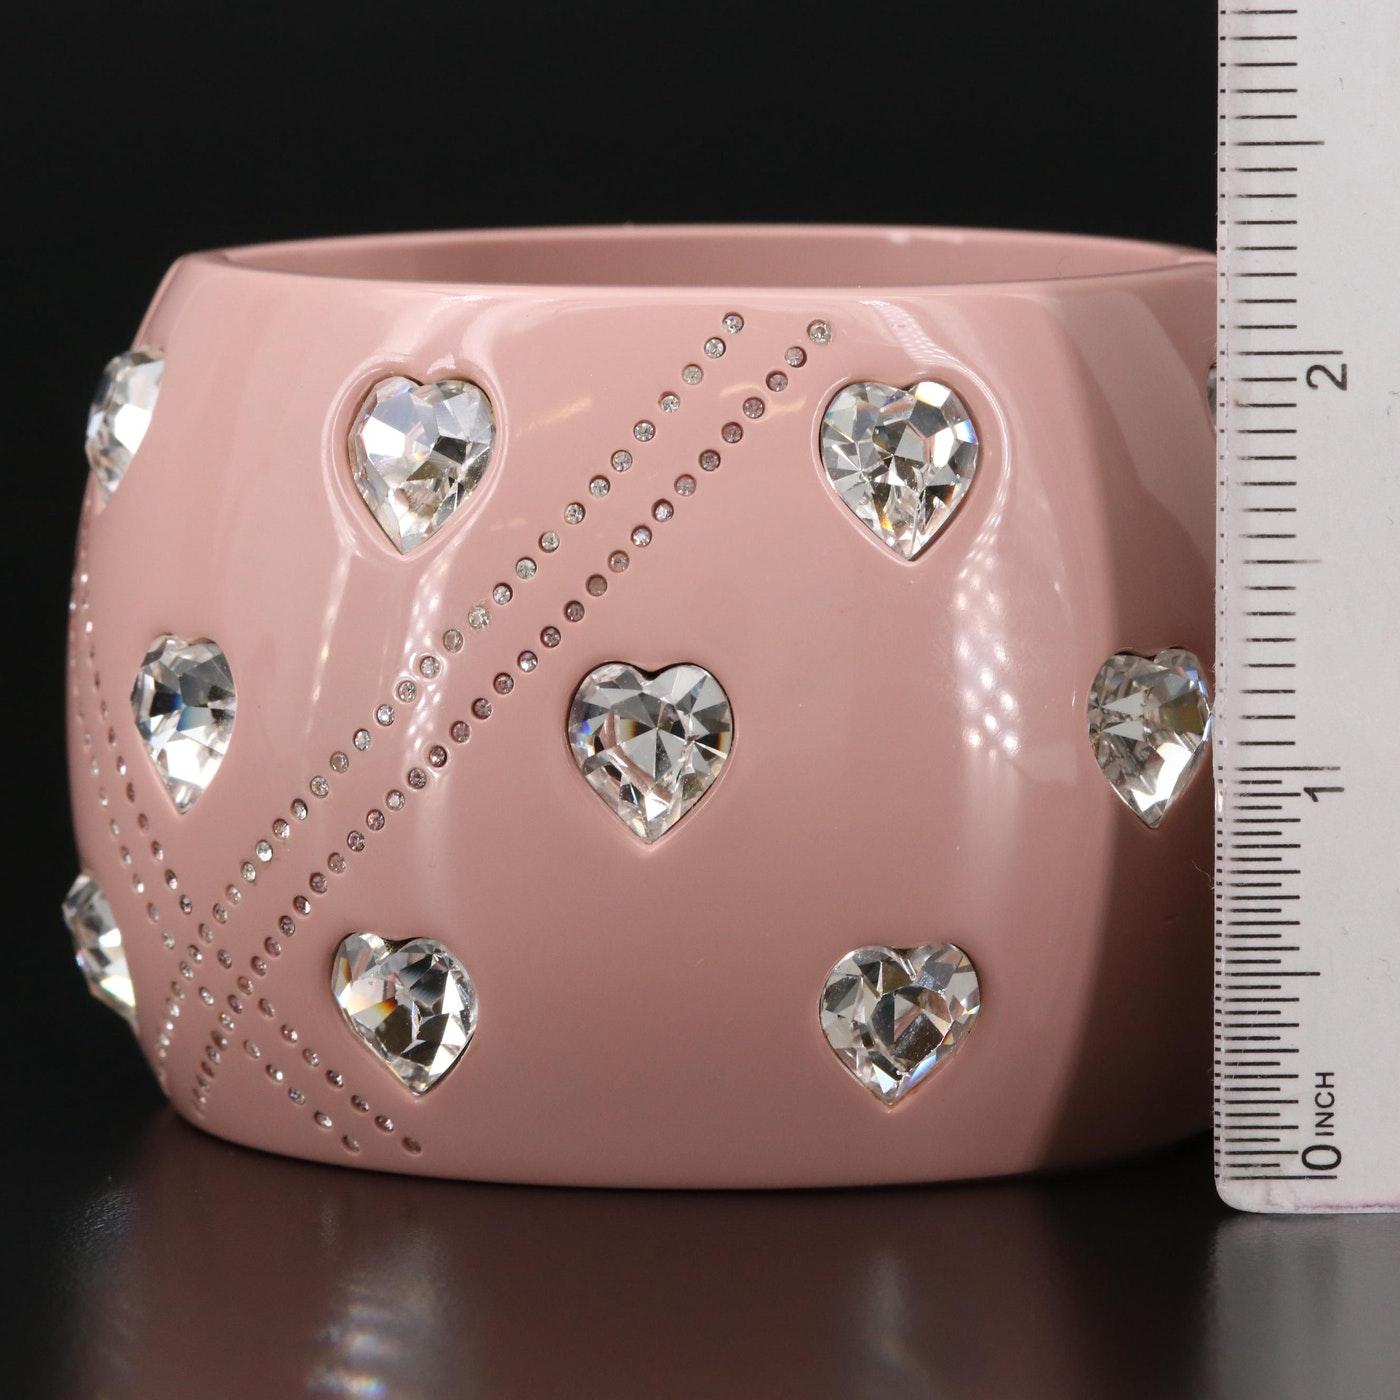 Chanel 2004 pale dusty rose acrylic clamper cuff with inlaid faceted silver-backed heart crystals, a geometric design featuring double rows of intersecting inlaid mini-crystals and two CC logos inlaid with mini-crystals at the bottom of each side.